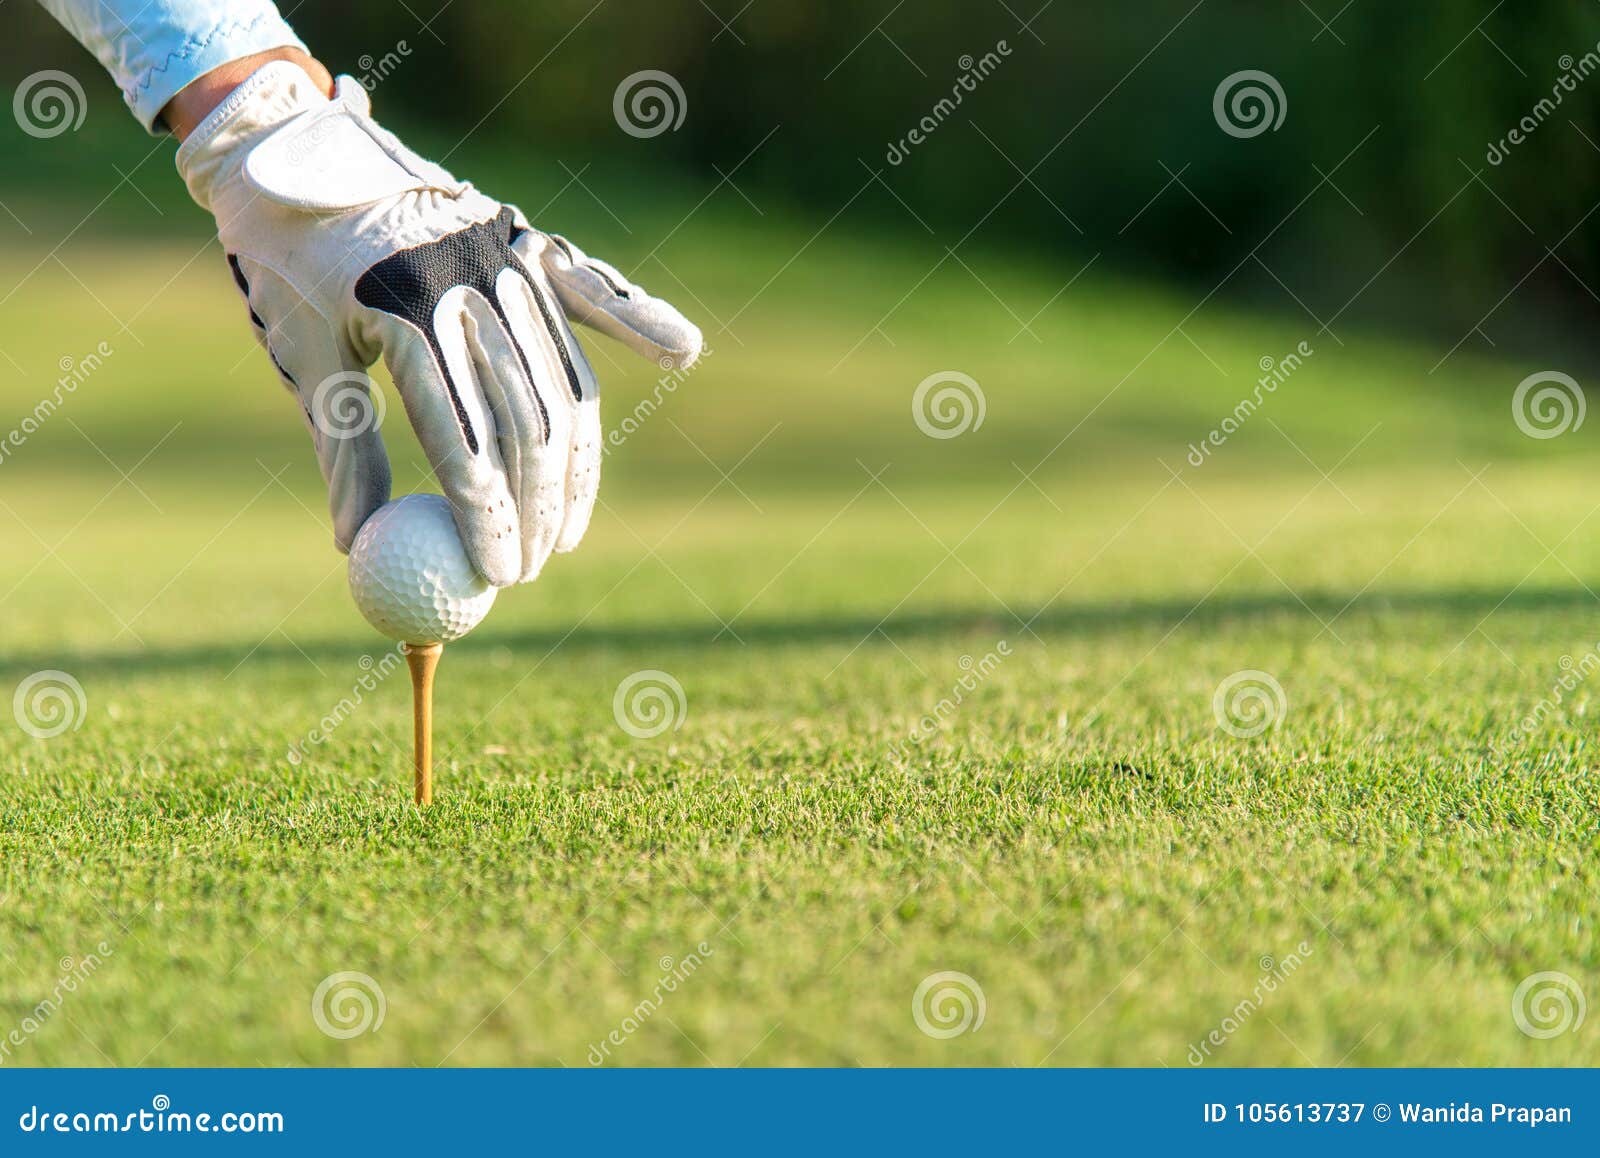 hand asian woman putting golf ball on tee with club in golf course on sunny day for healthy sport.